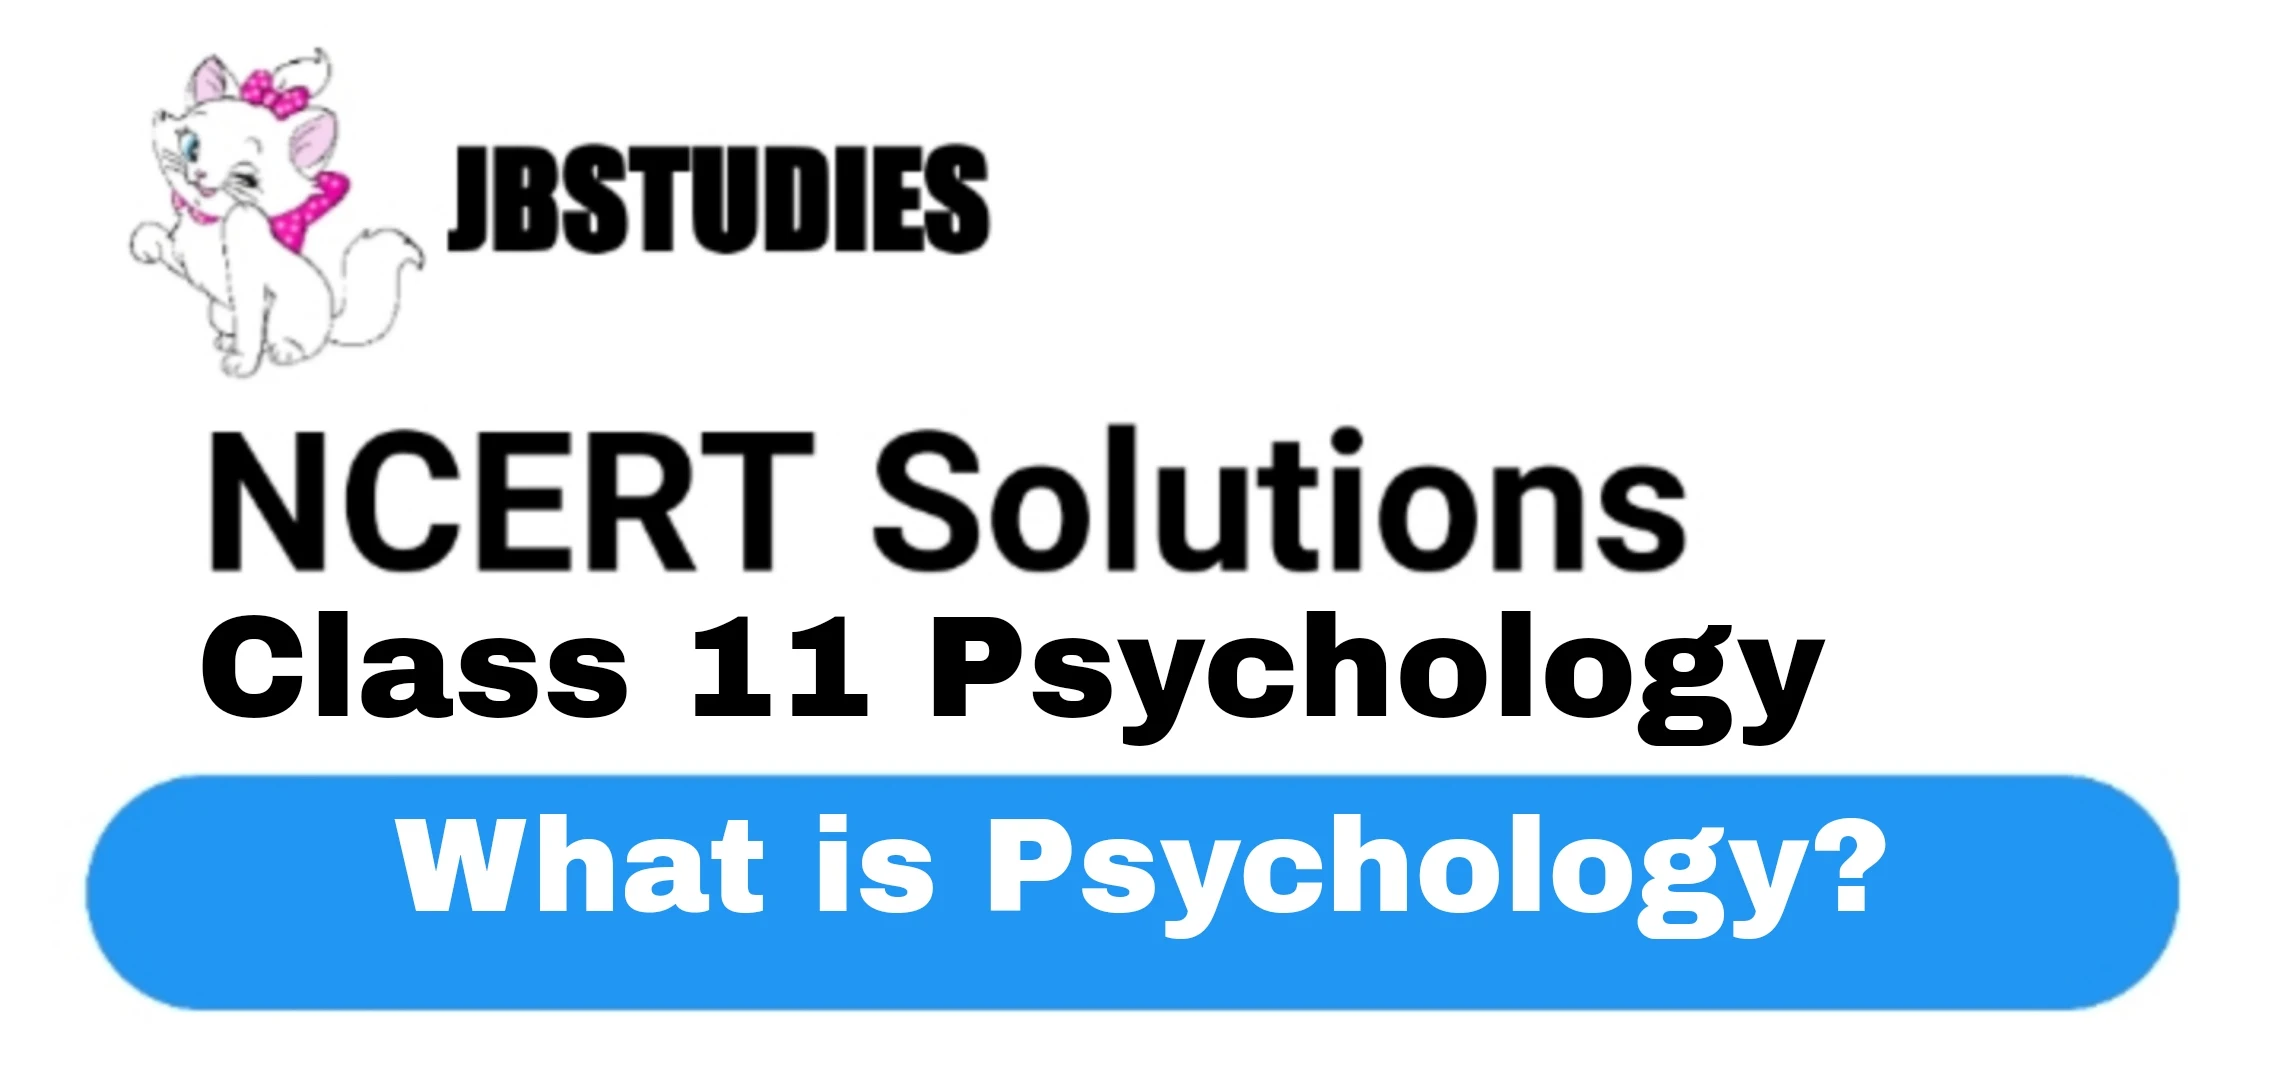 Solutions Class 11 Psychology Chapter -1 (What is Psychology?)